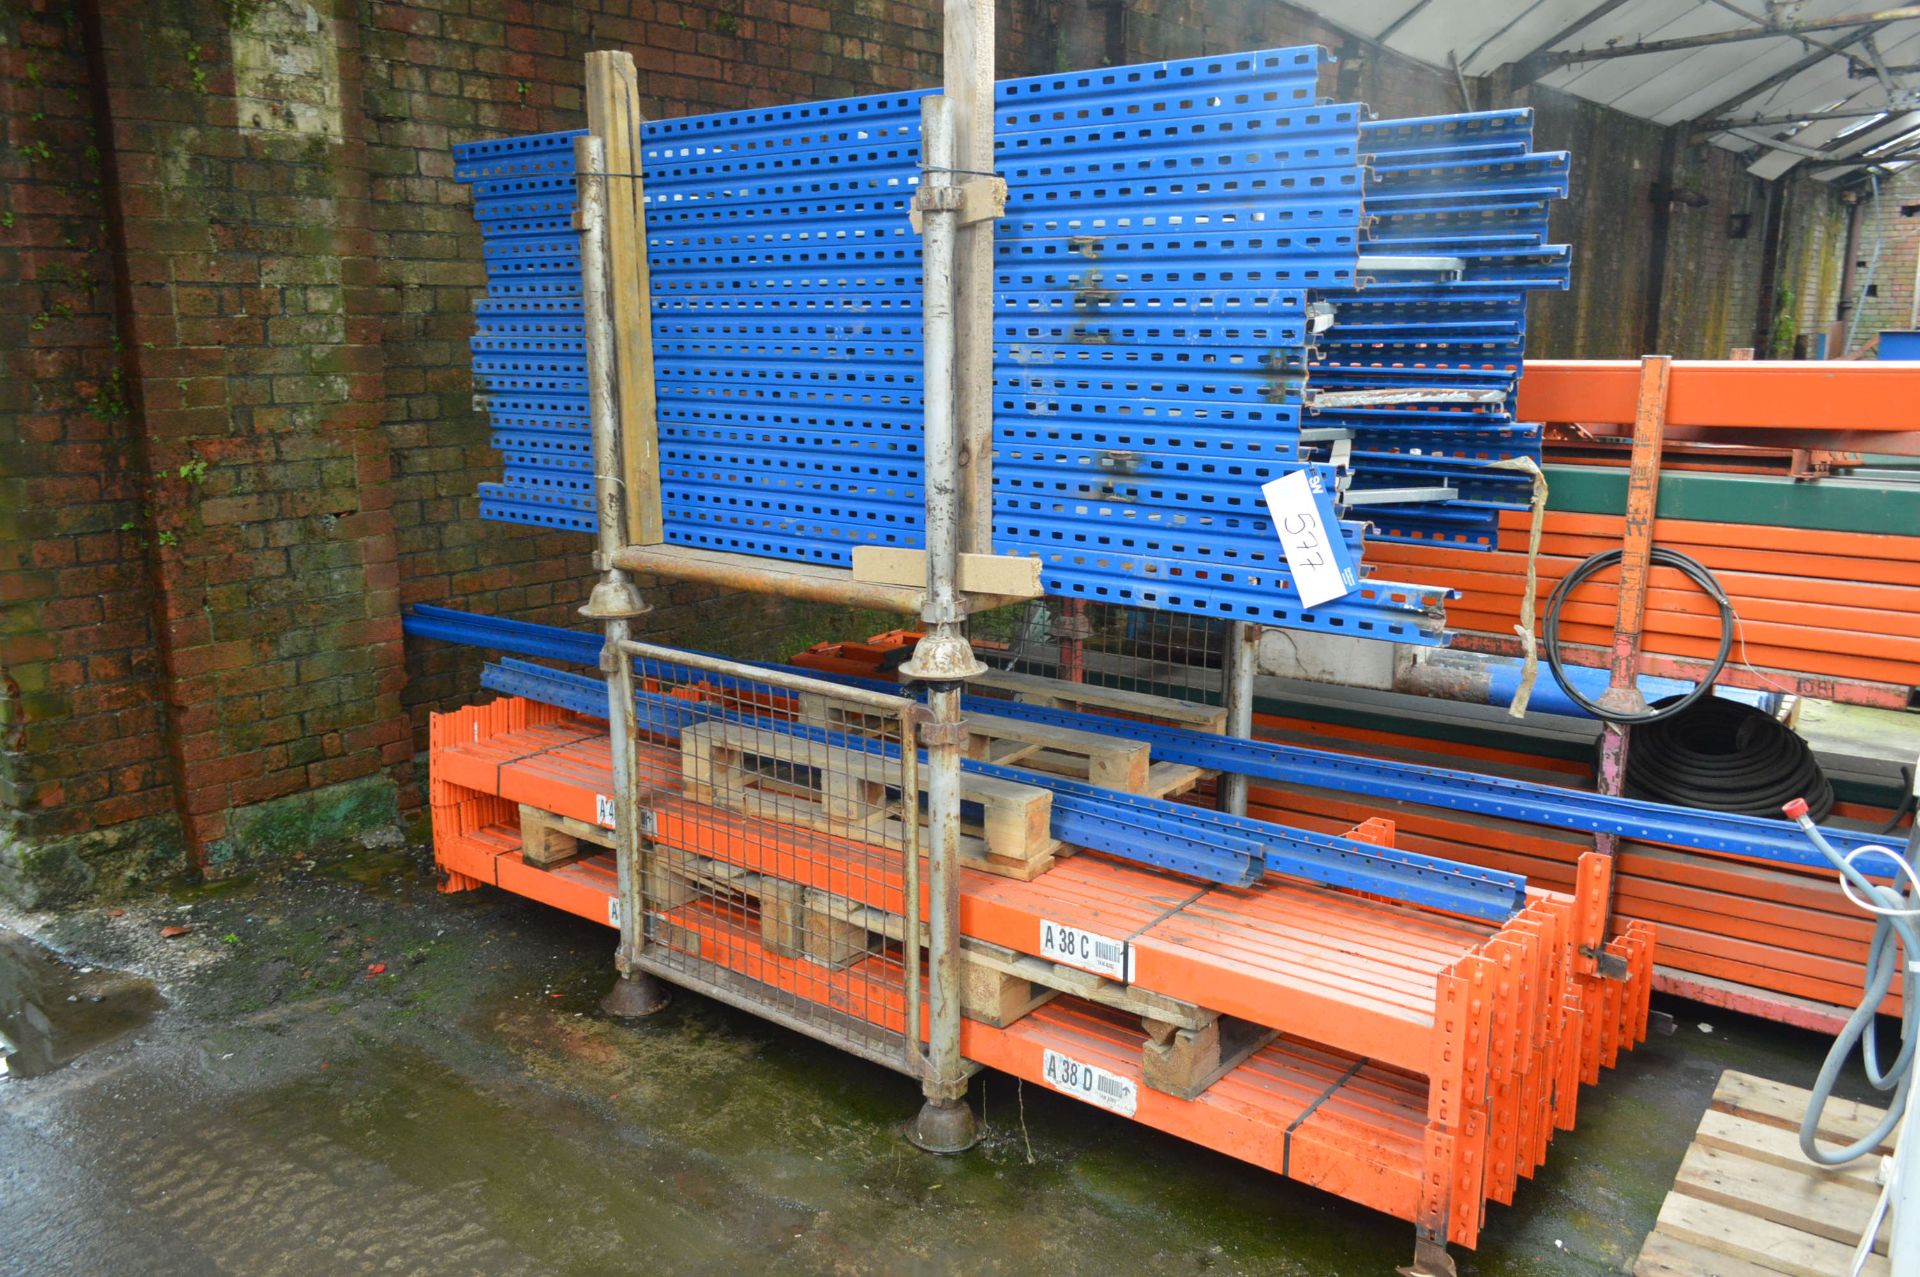 Ten Pallet Racking Uprights, each approx. 1m x 2.3m, with approx. 35 cross beams, mainly 2.7m